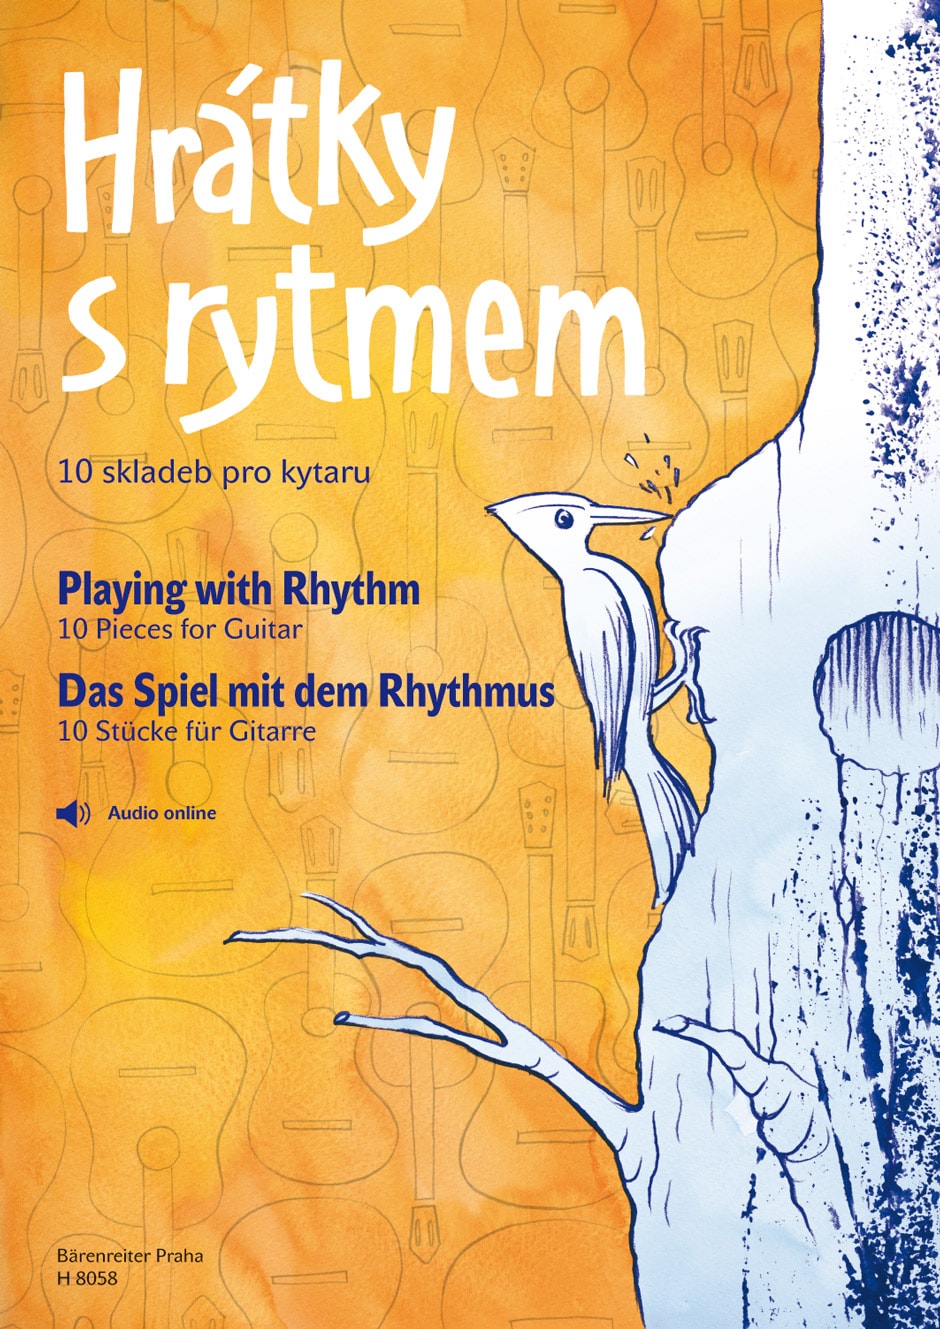 Playing with Rhythm for Guitar published by Barenreiter